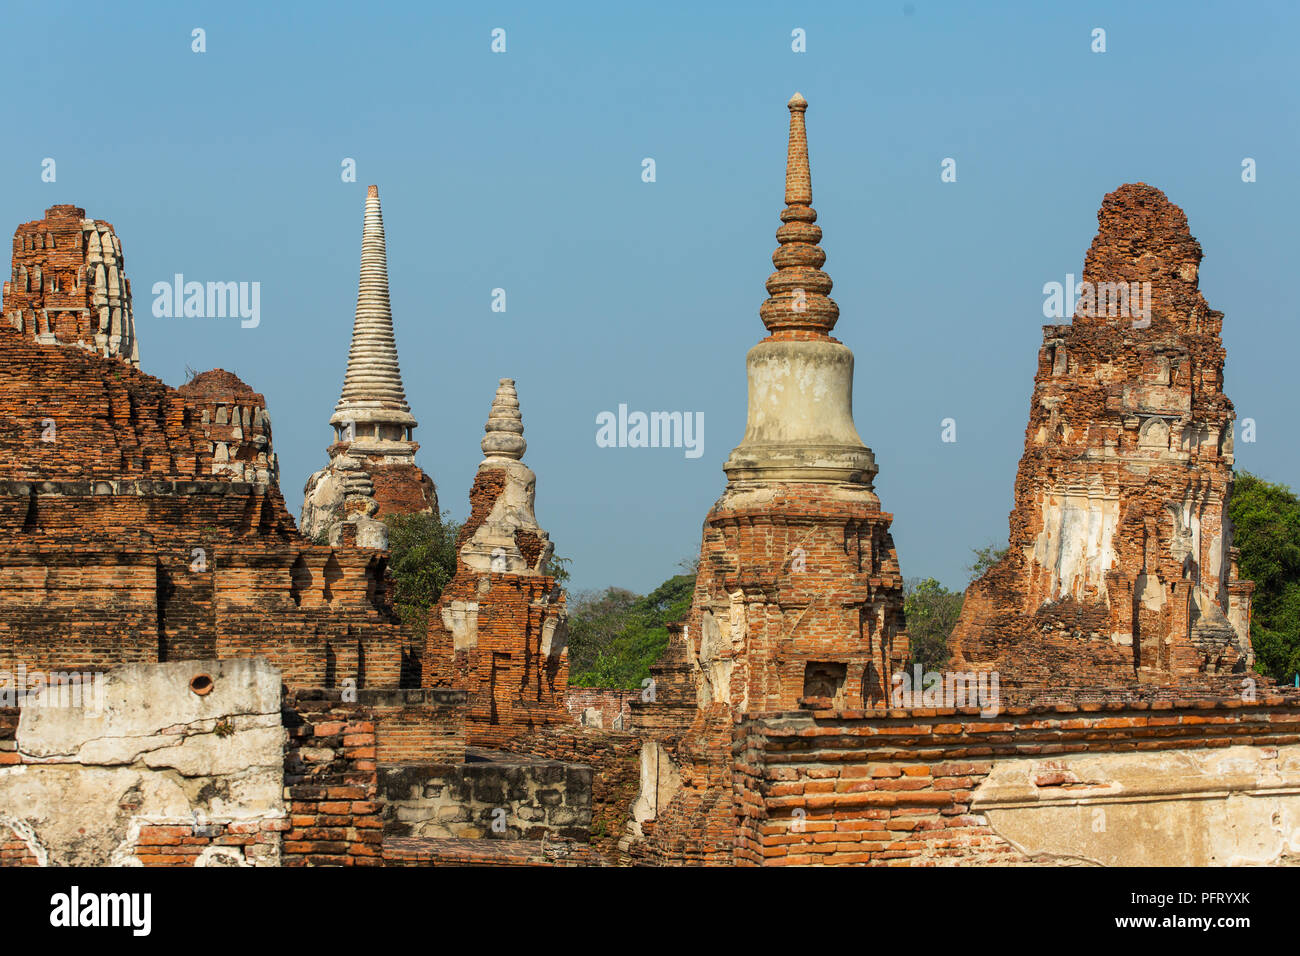 Wat Mahathat or Temple of the Great Relic in Ayutthaya, Thailand Stock Photo